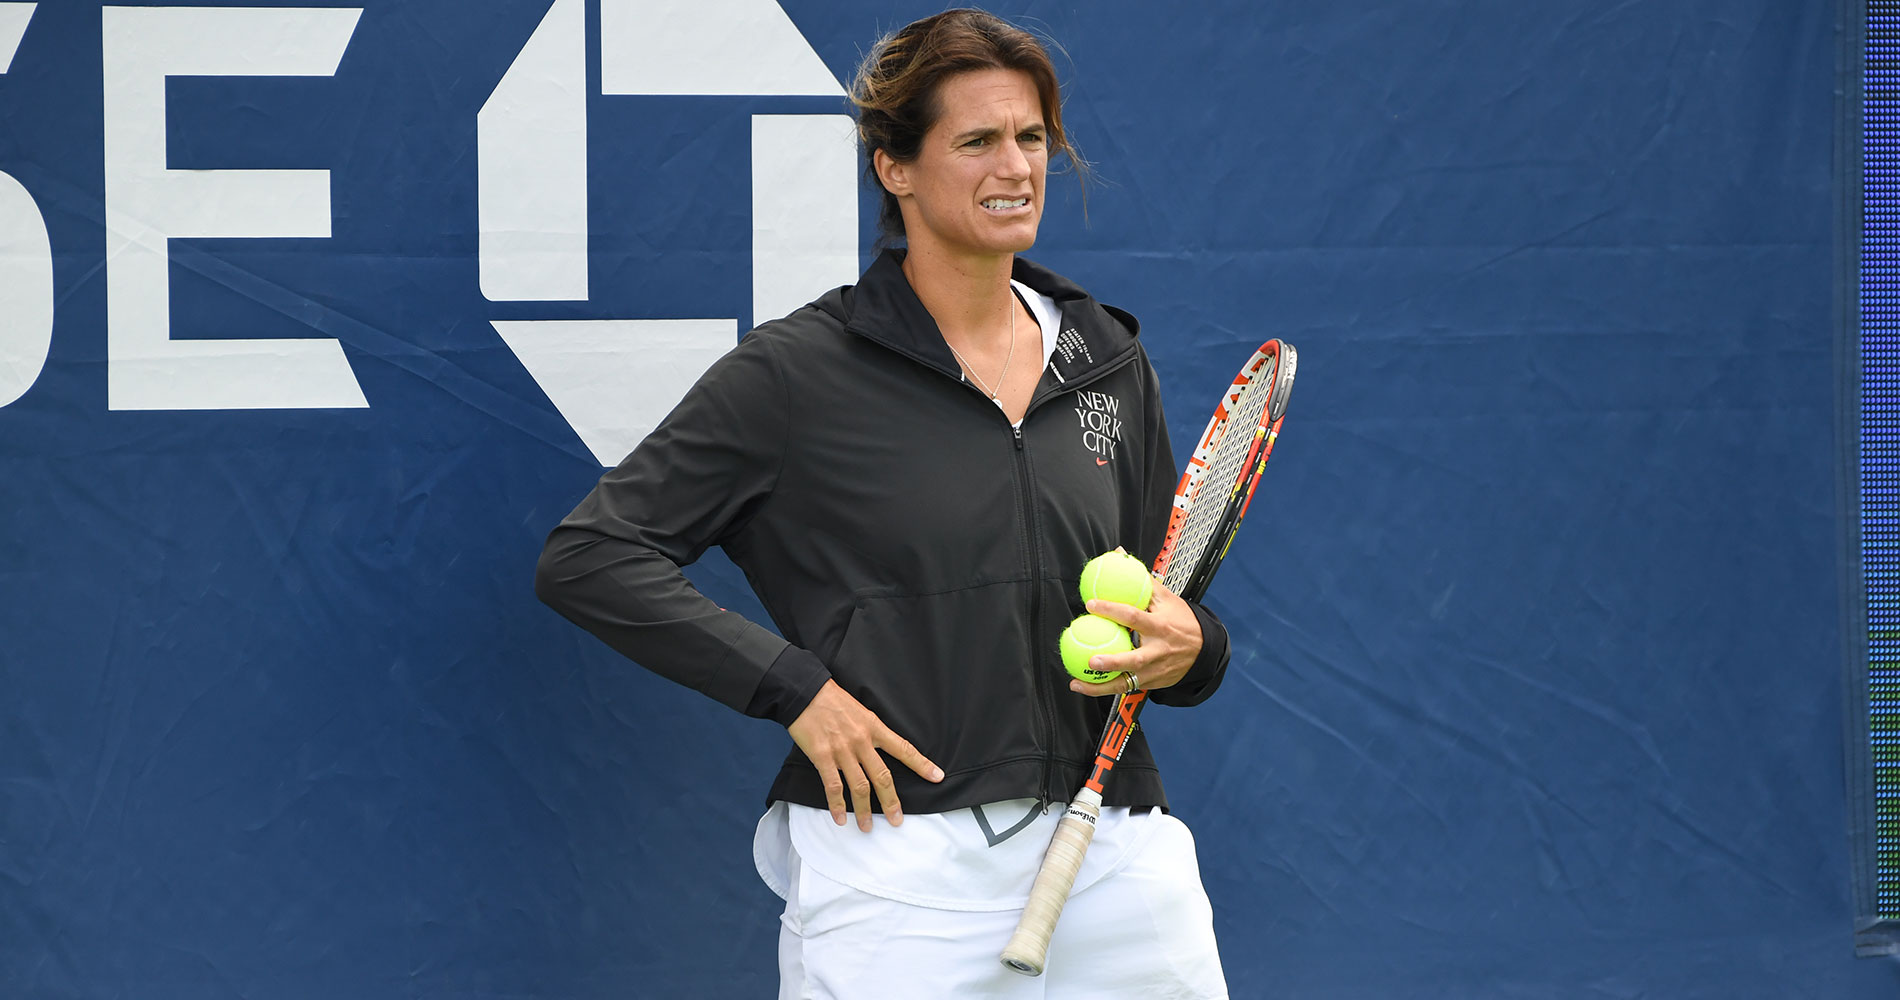 Amelie Mauresmo at US Open 2020